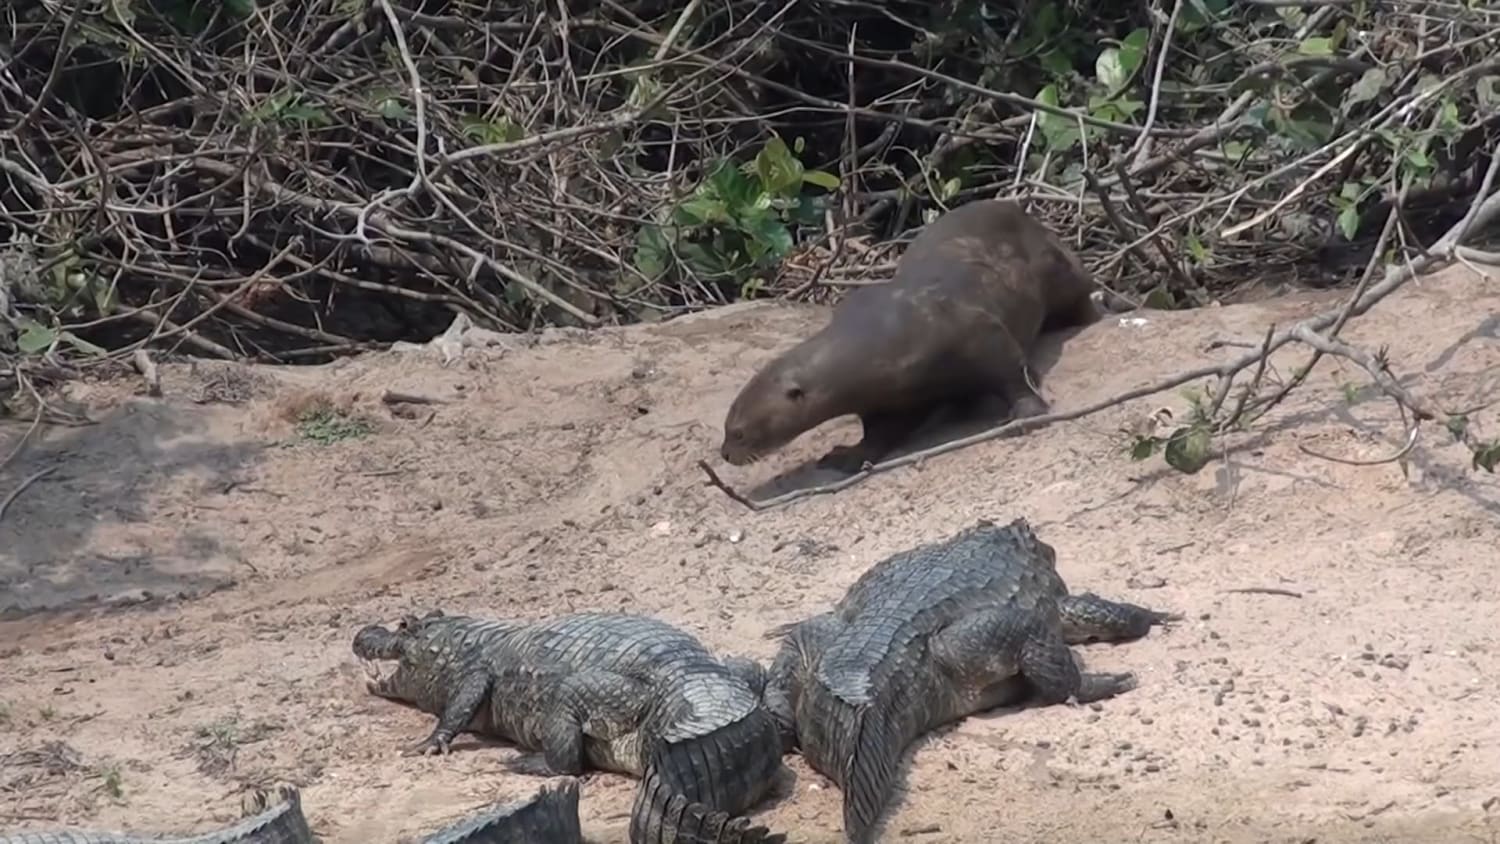 Yacare caimans, native to Argentina, Bolivia, Brazil, and Paraguay, mainly eat small aquatic prey such as fish, snails and occasionally snakes. Males can grow to a length of 3 m and females 1.4 m. Here are several caimans basking on a river bank while an insouciant otter gives himself a sand bath.